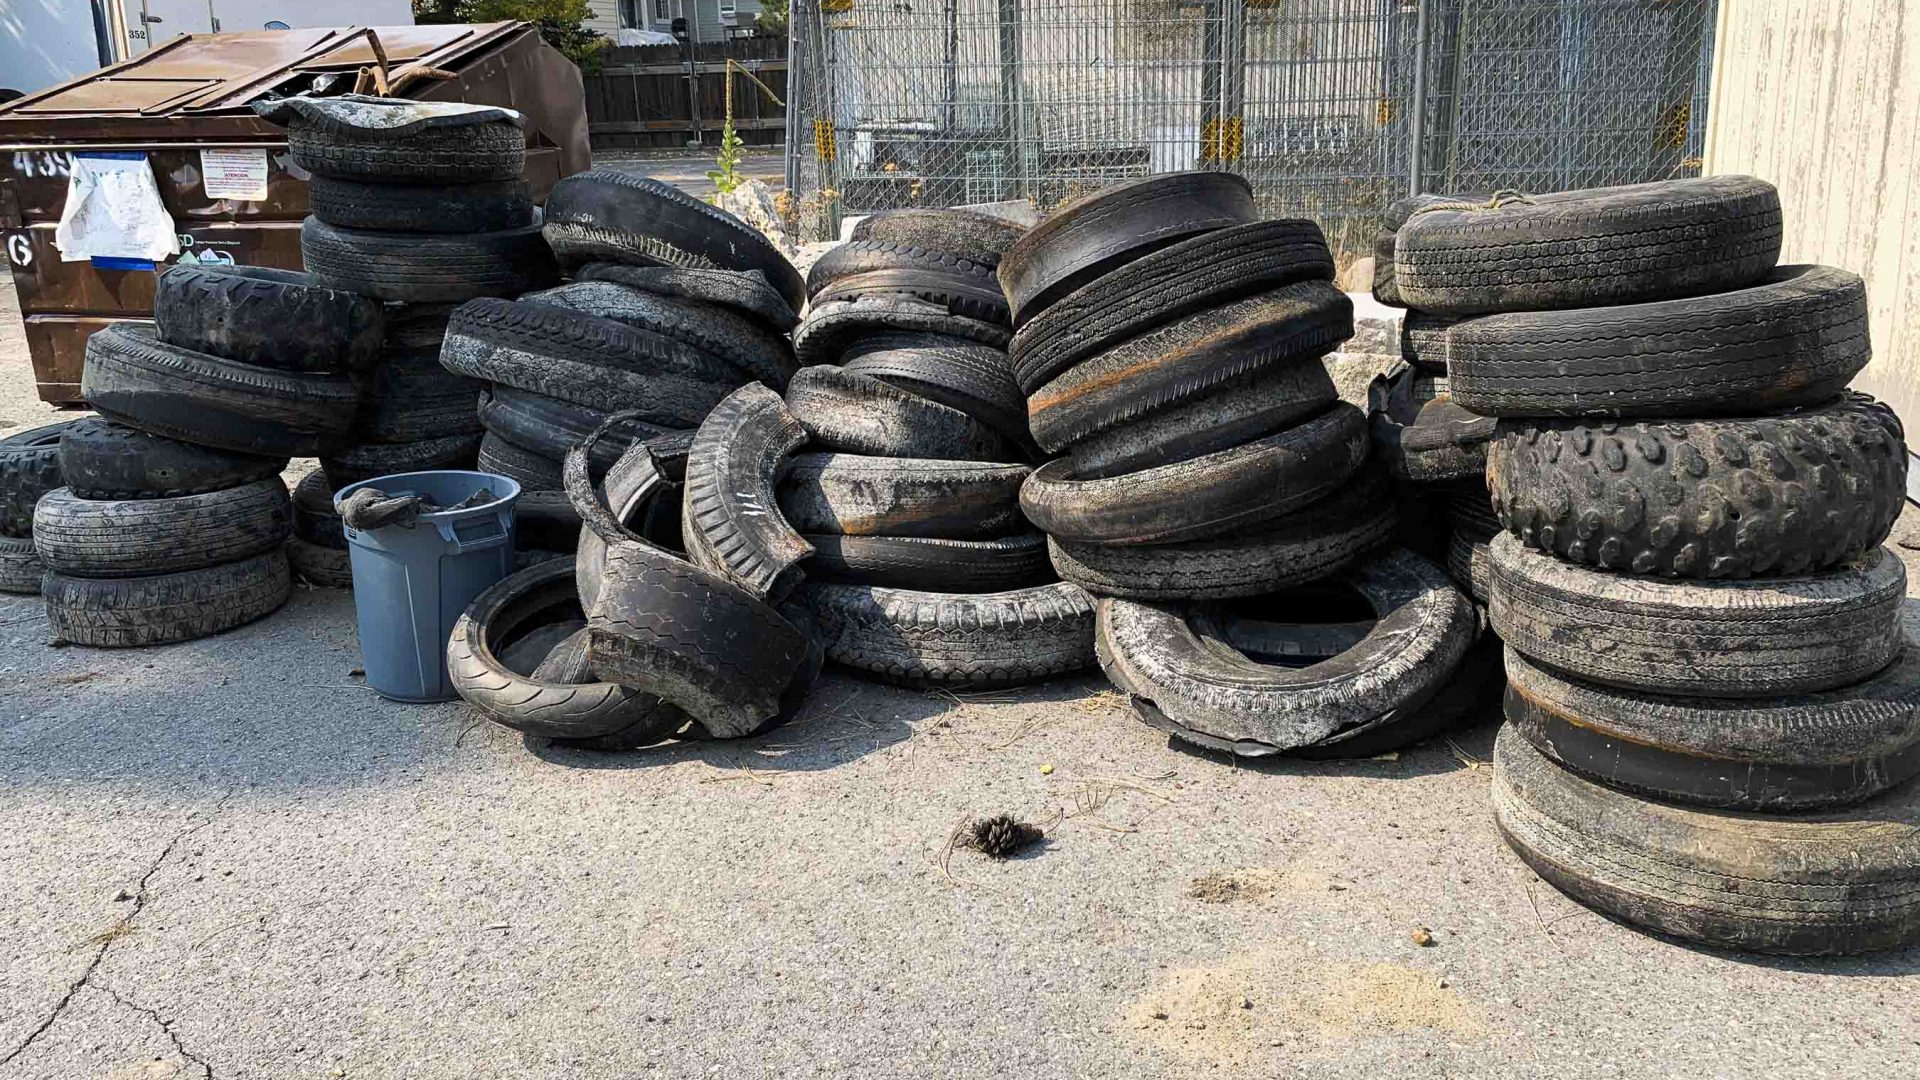 Piles of discarded car tires that have been retrieved from Lake Tahoe.